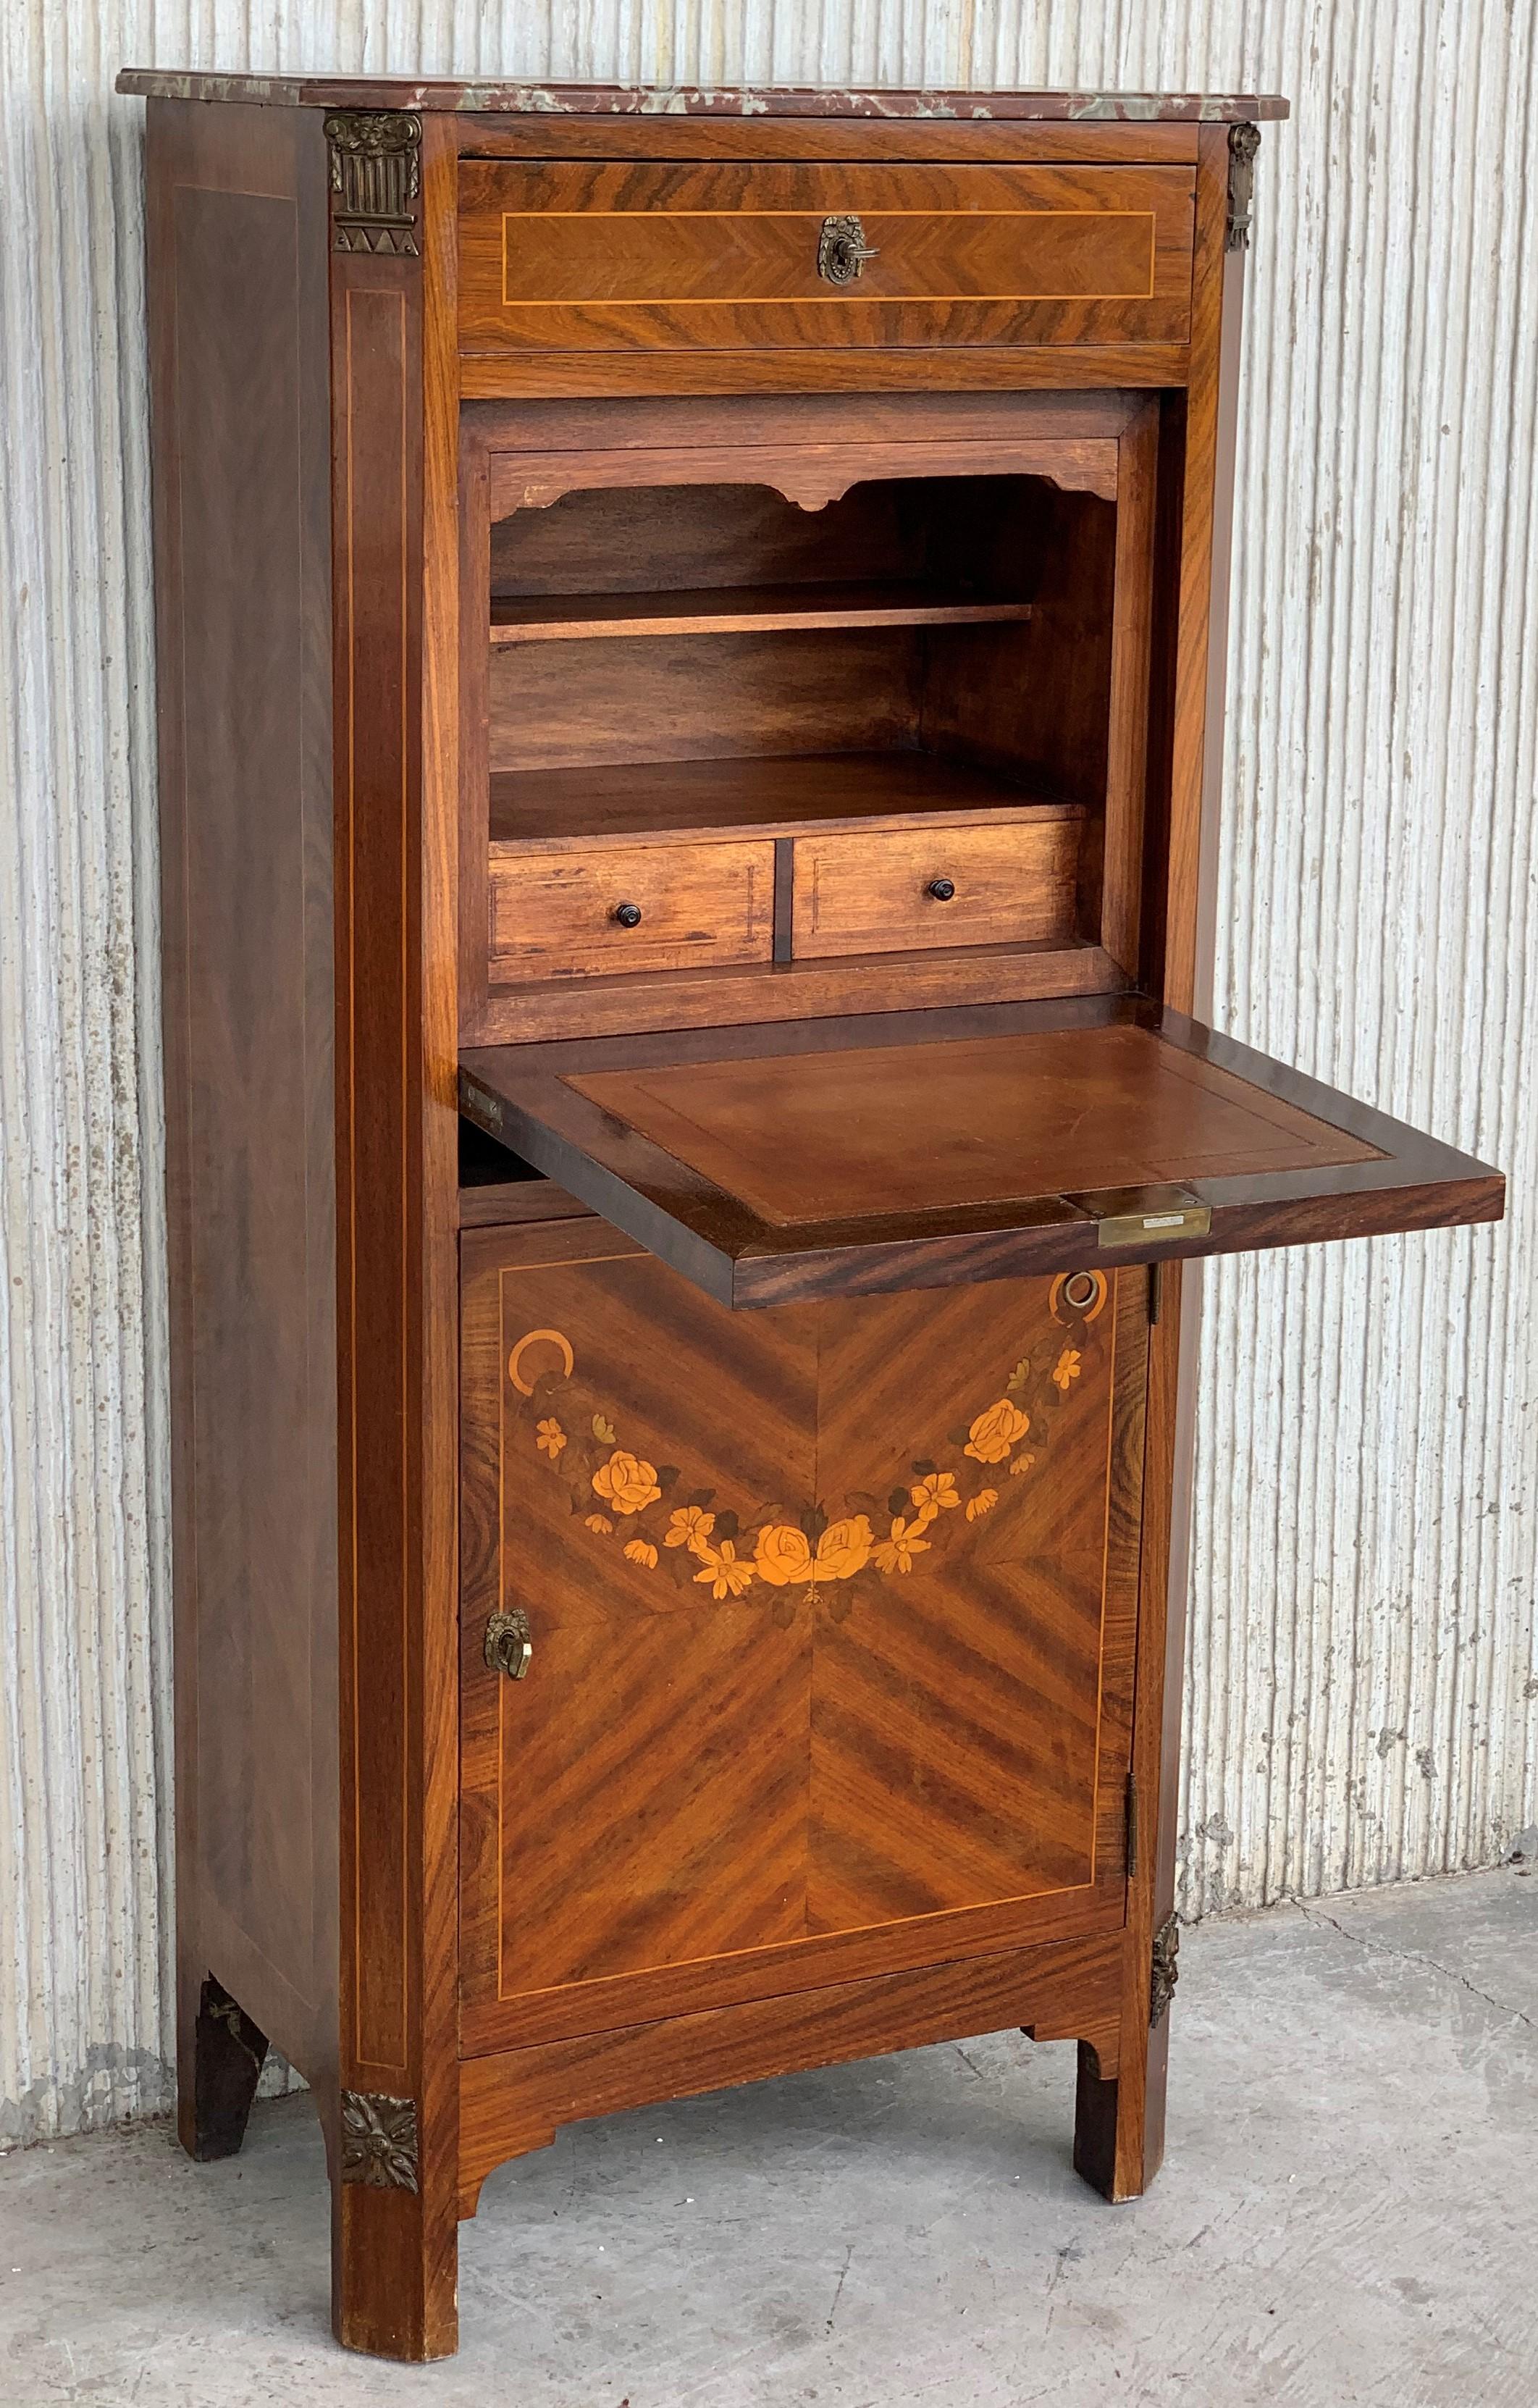 Secretaire a abattant, Spain circa 1900. The outside with fall front and one high drawer and one low door with compartment, beautiful marquetry oakwood . The wood inside opens to a central compartment flanked by two drawers.

Measures: Height to